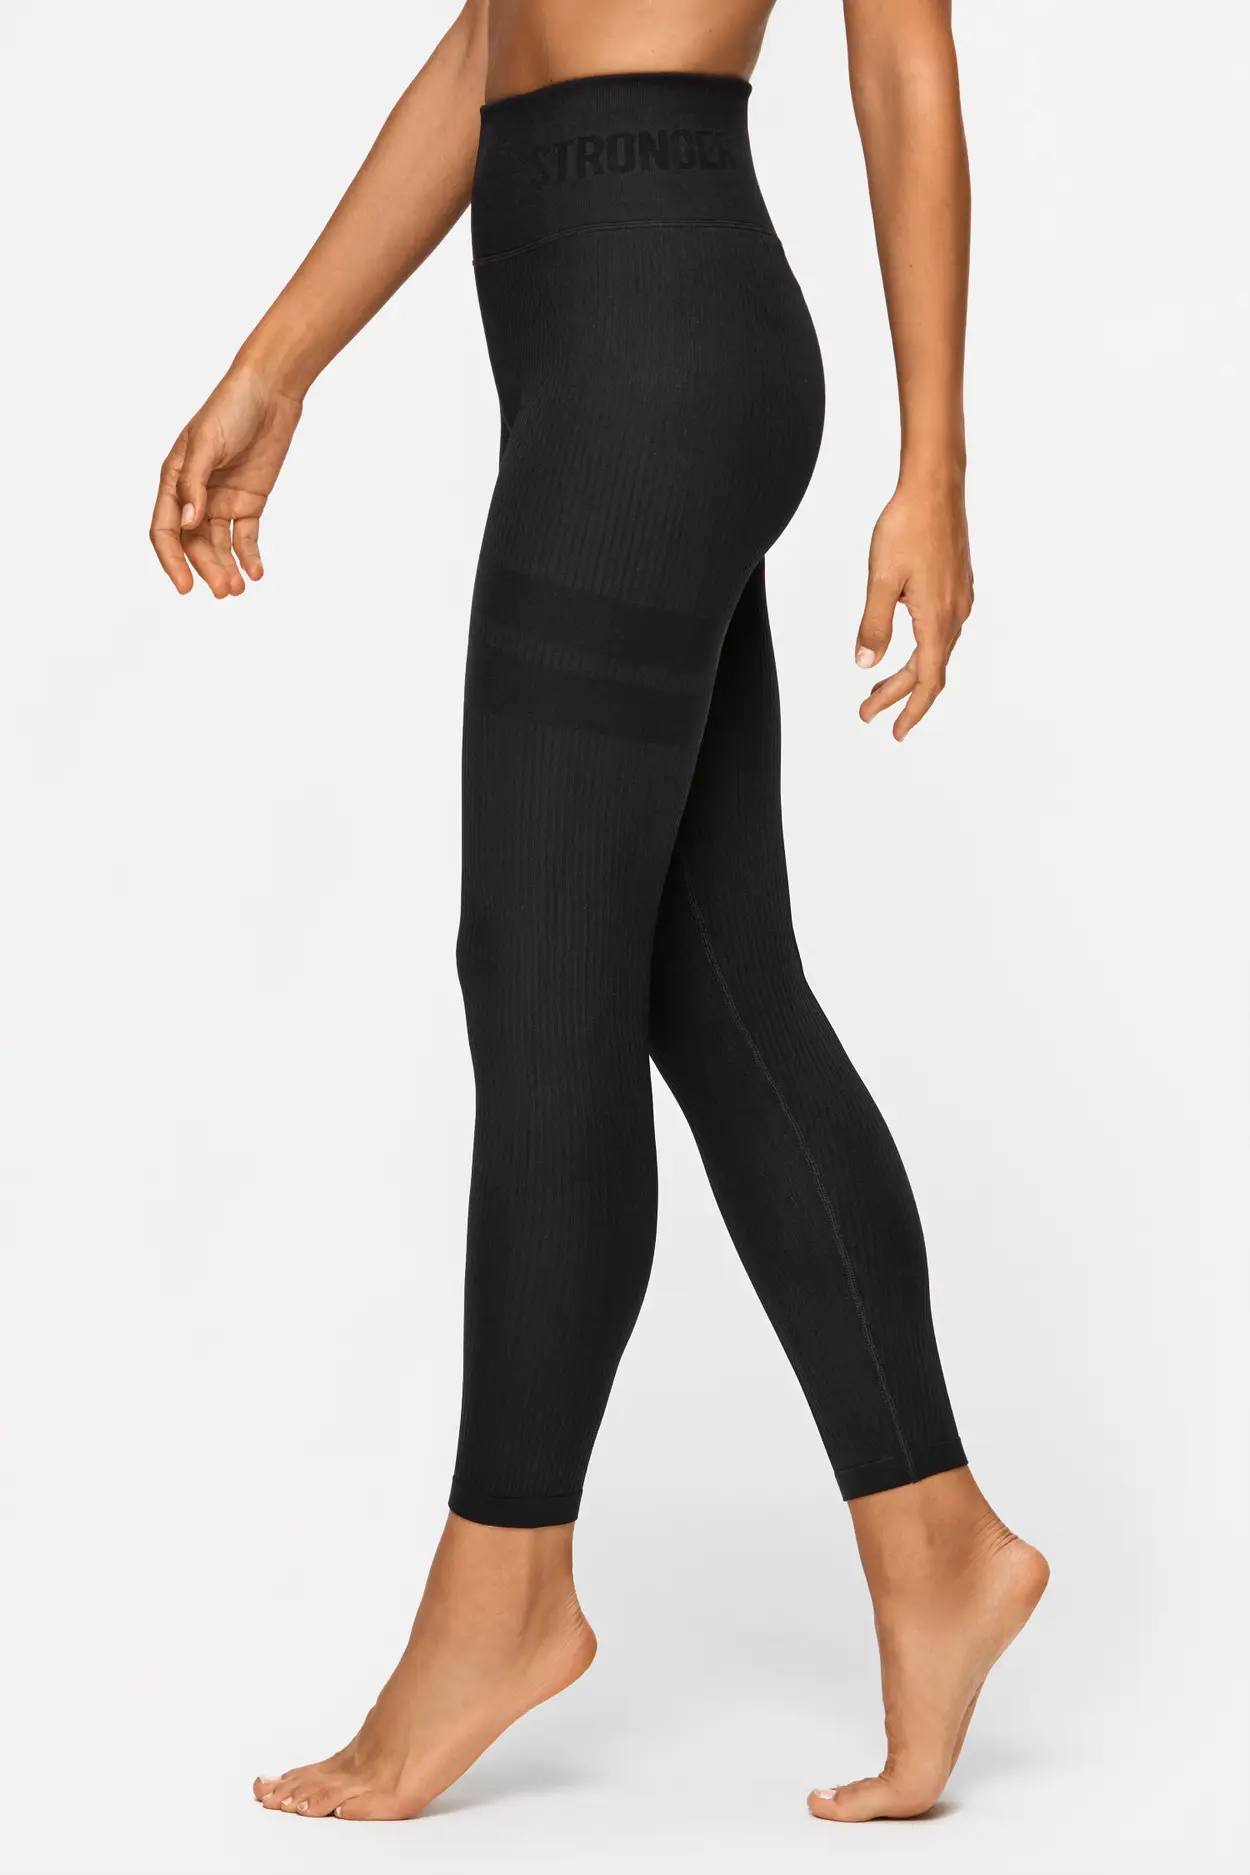 Seamless Ribbed Waistband Seamless Workout Leggings For Plus Size